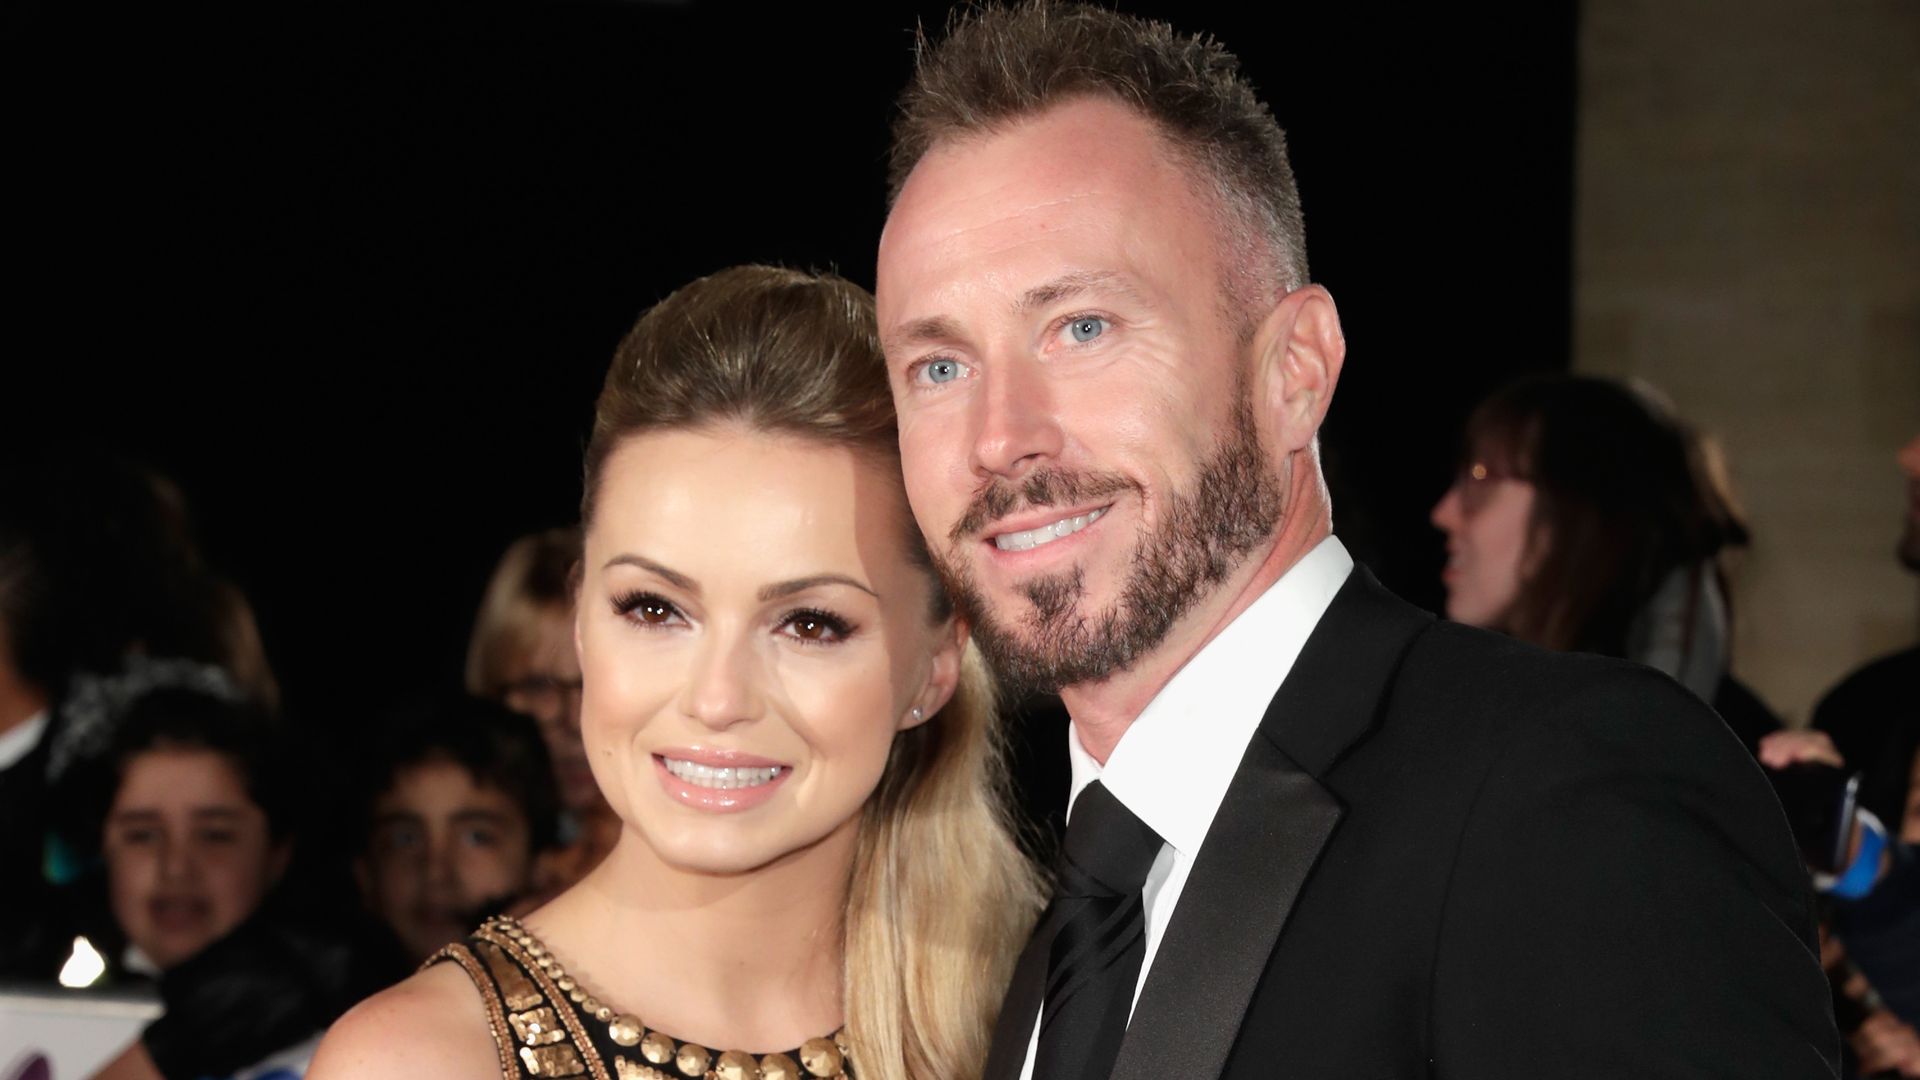 James and Ola Jordan open up about their 24-year relationship in exclusive video